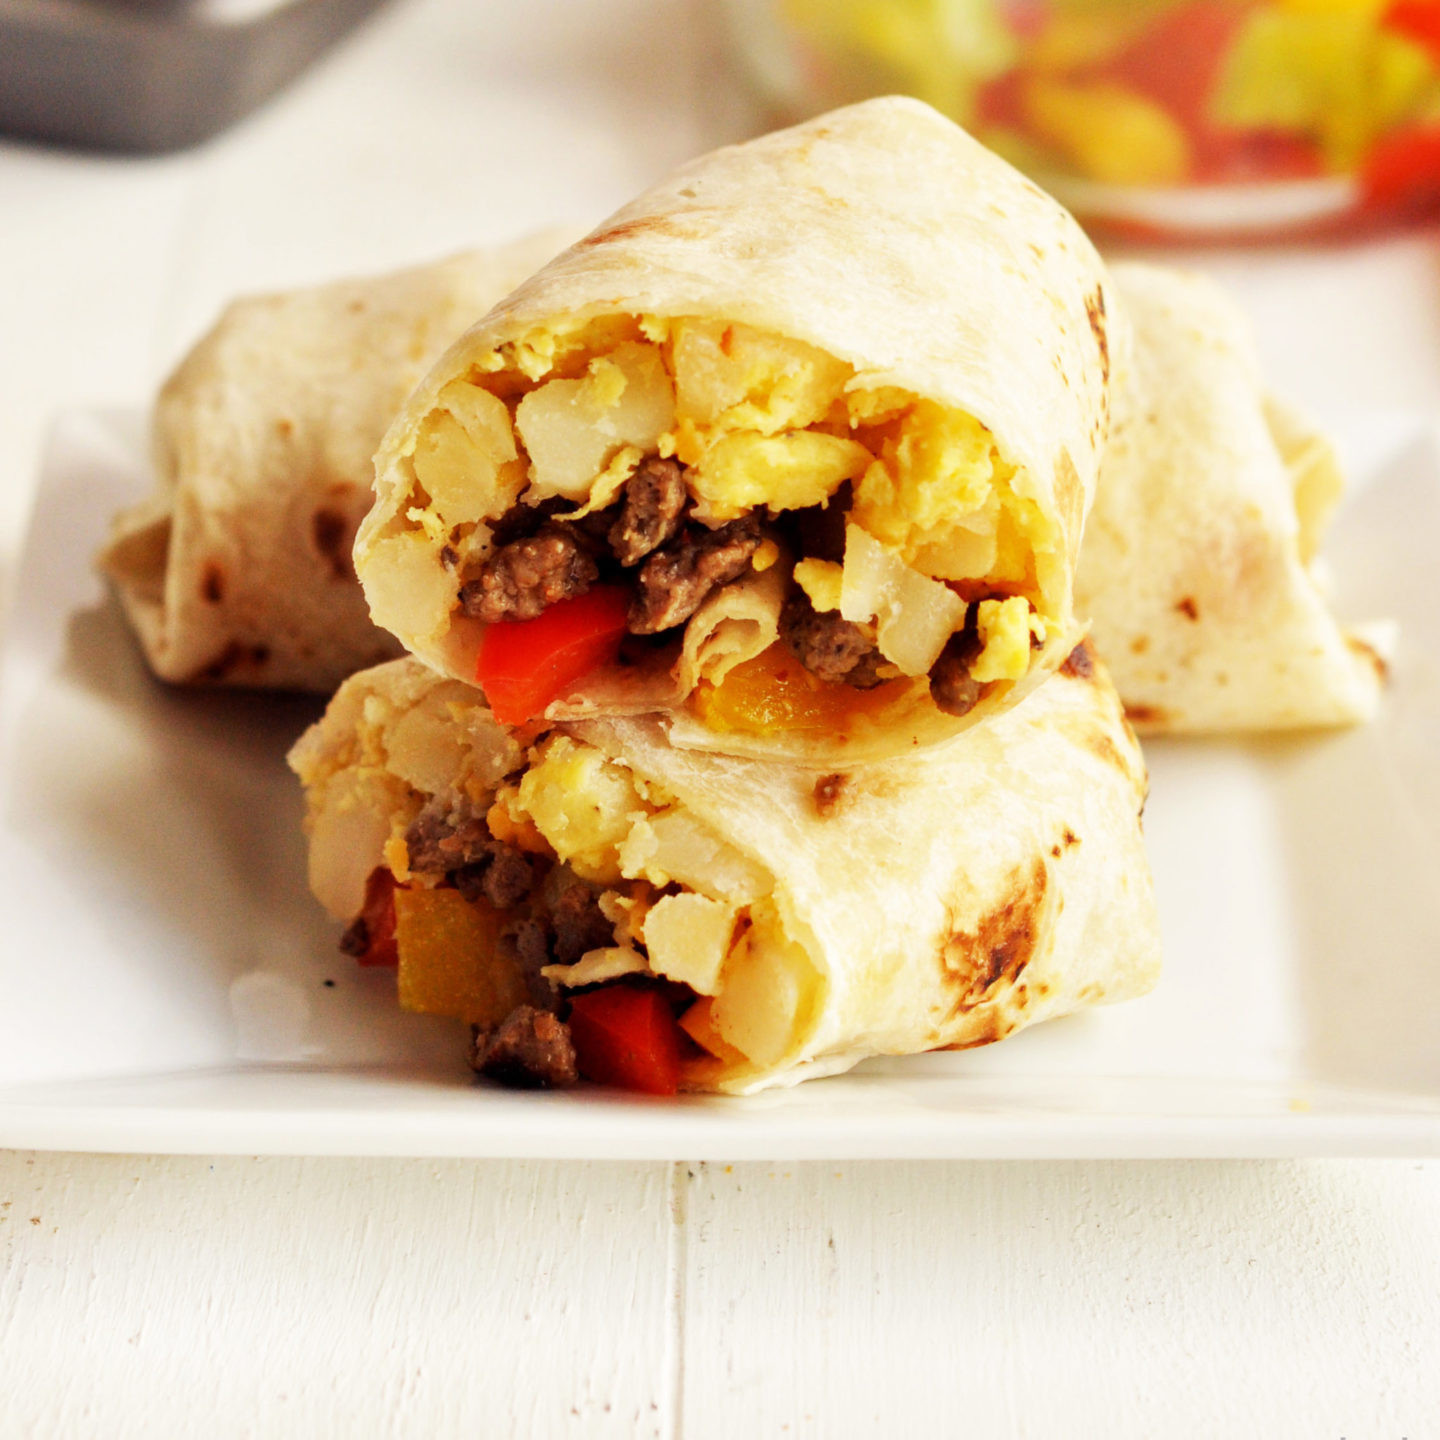 15 Best Santiago&amp;#39;s Breakfast Burritos – Easy Recipes To Make at Home